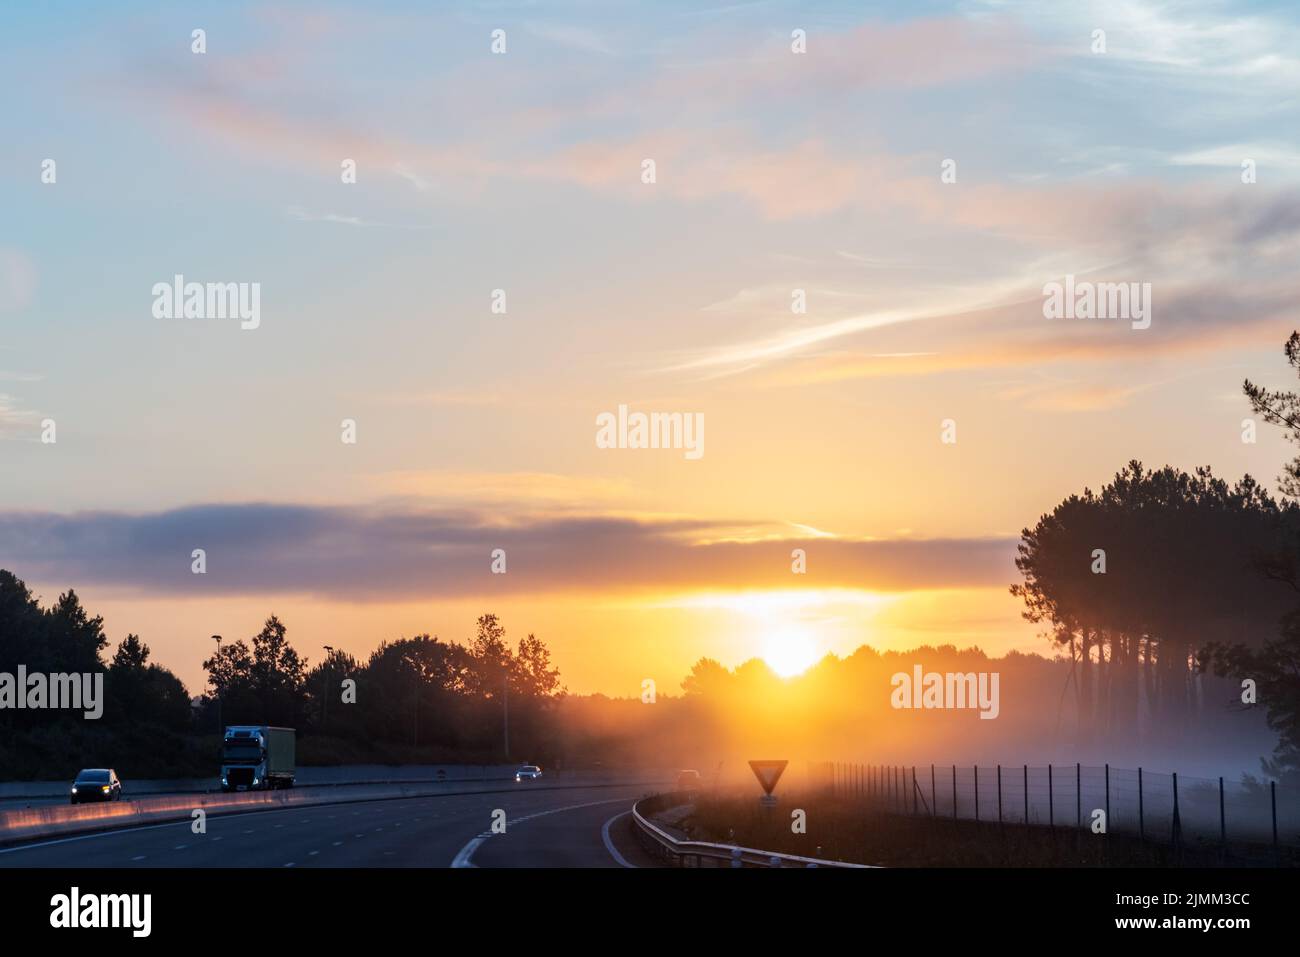 Landscape of a highway at dawn with the sun beginning to rise and the mist between the trees. Stock Photo